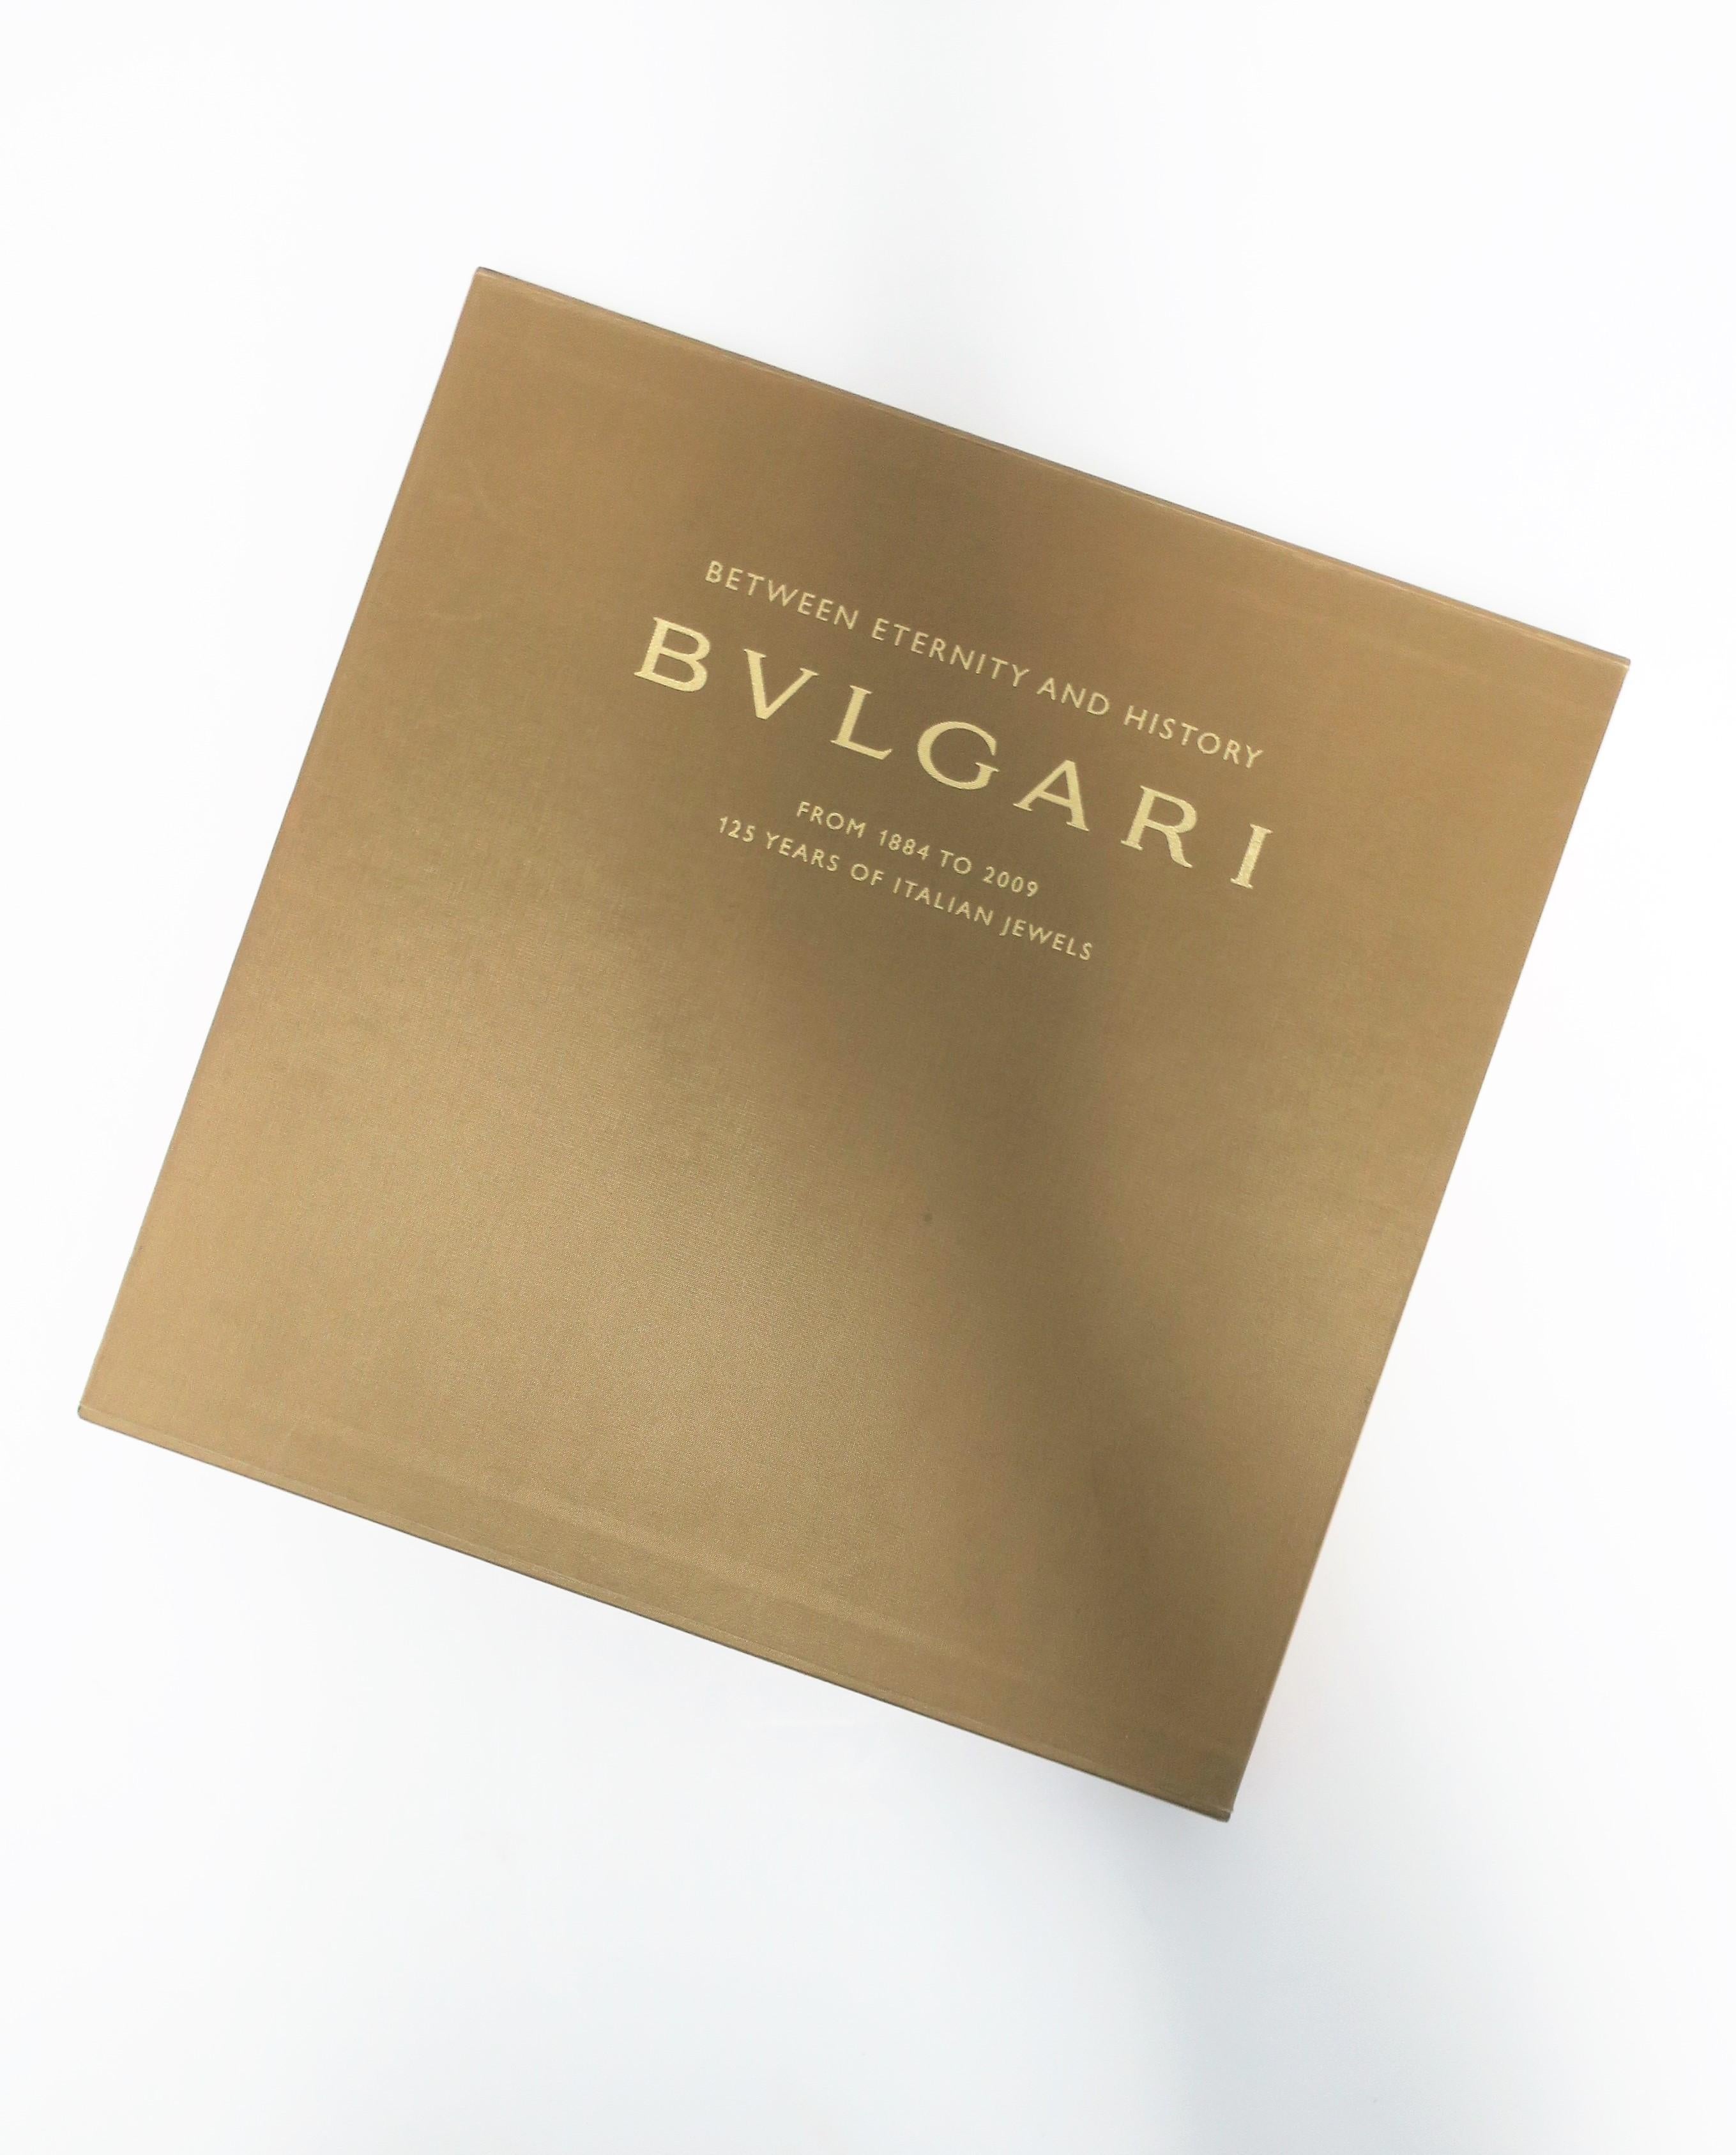 Bulgari Between Eternity and History Jewelry Coffee Table or Library Book